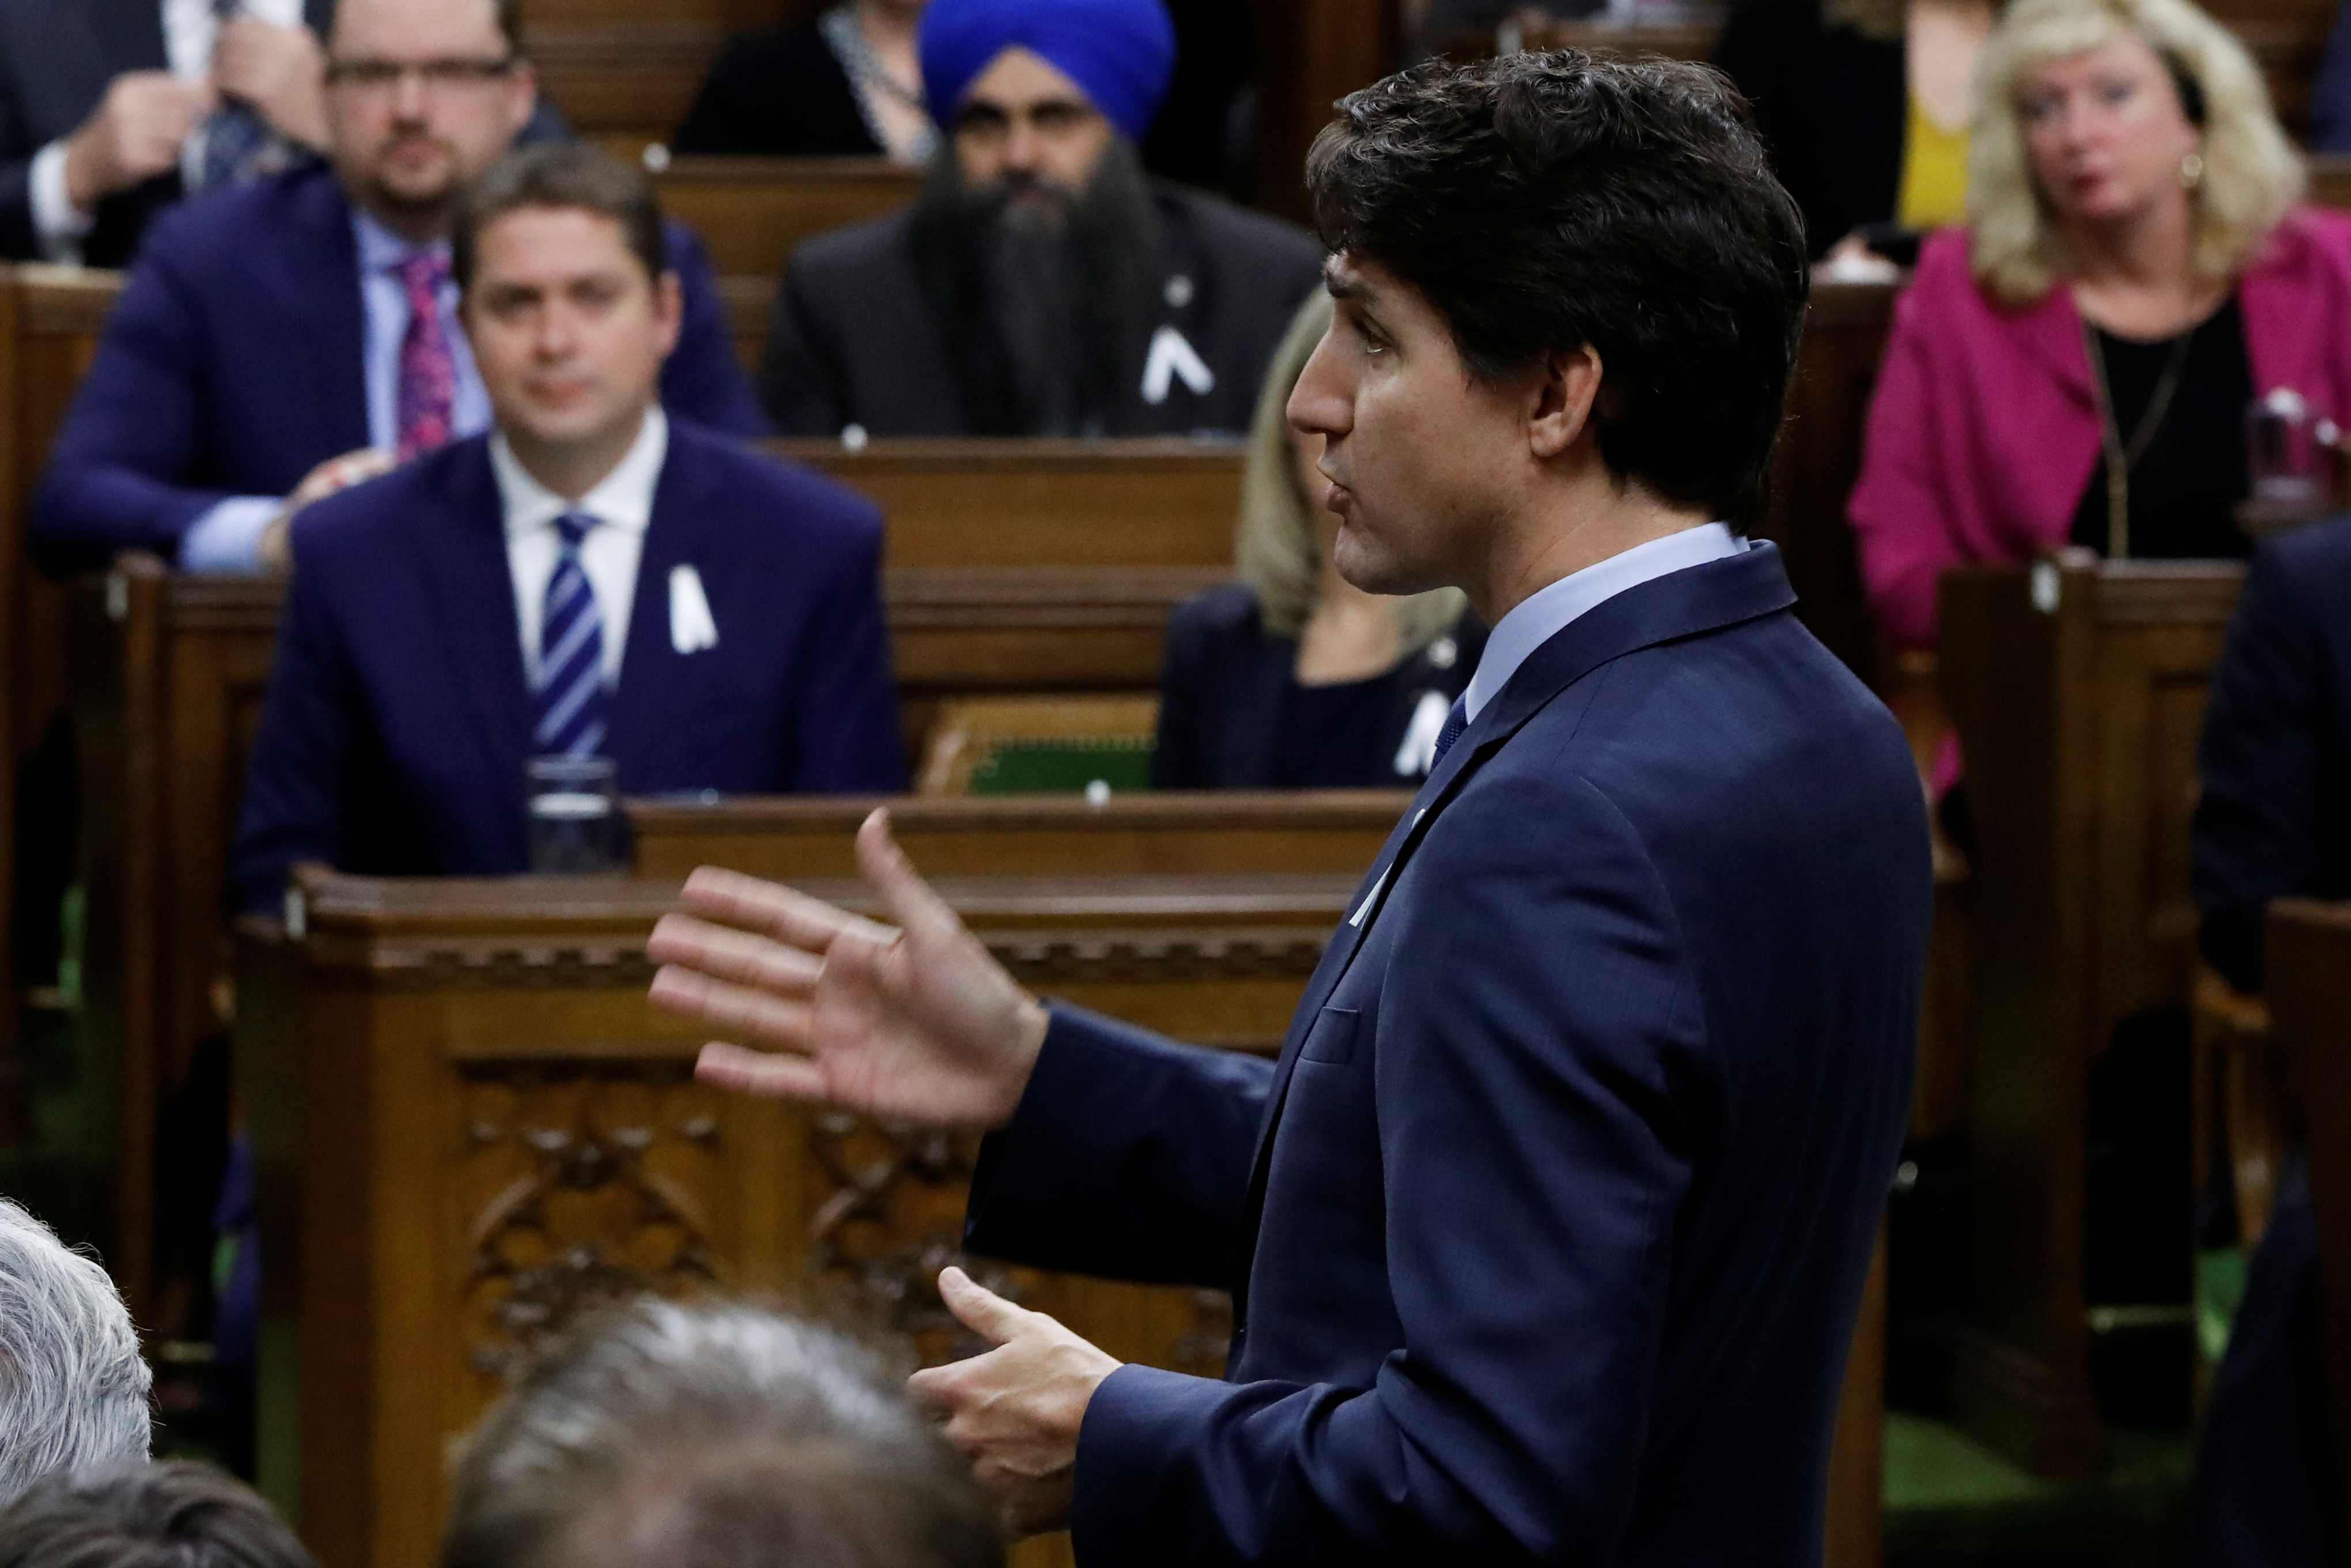 Canada's Prime Minister Justin Trudeau speaks during Question Period in the House of Commons on Parliament Hill in Ottawa, Ontario, Canada December 6, 2019. REUTERS/Blair Gable